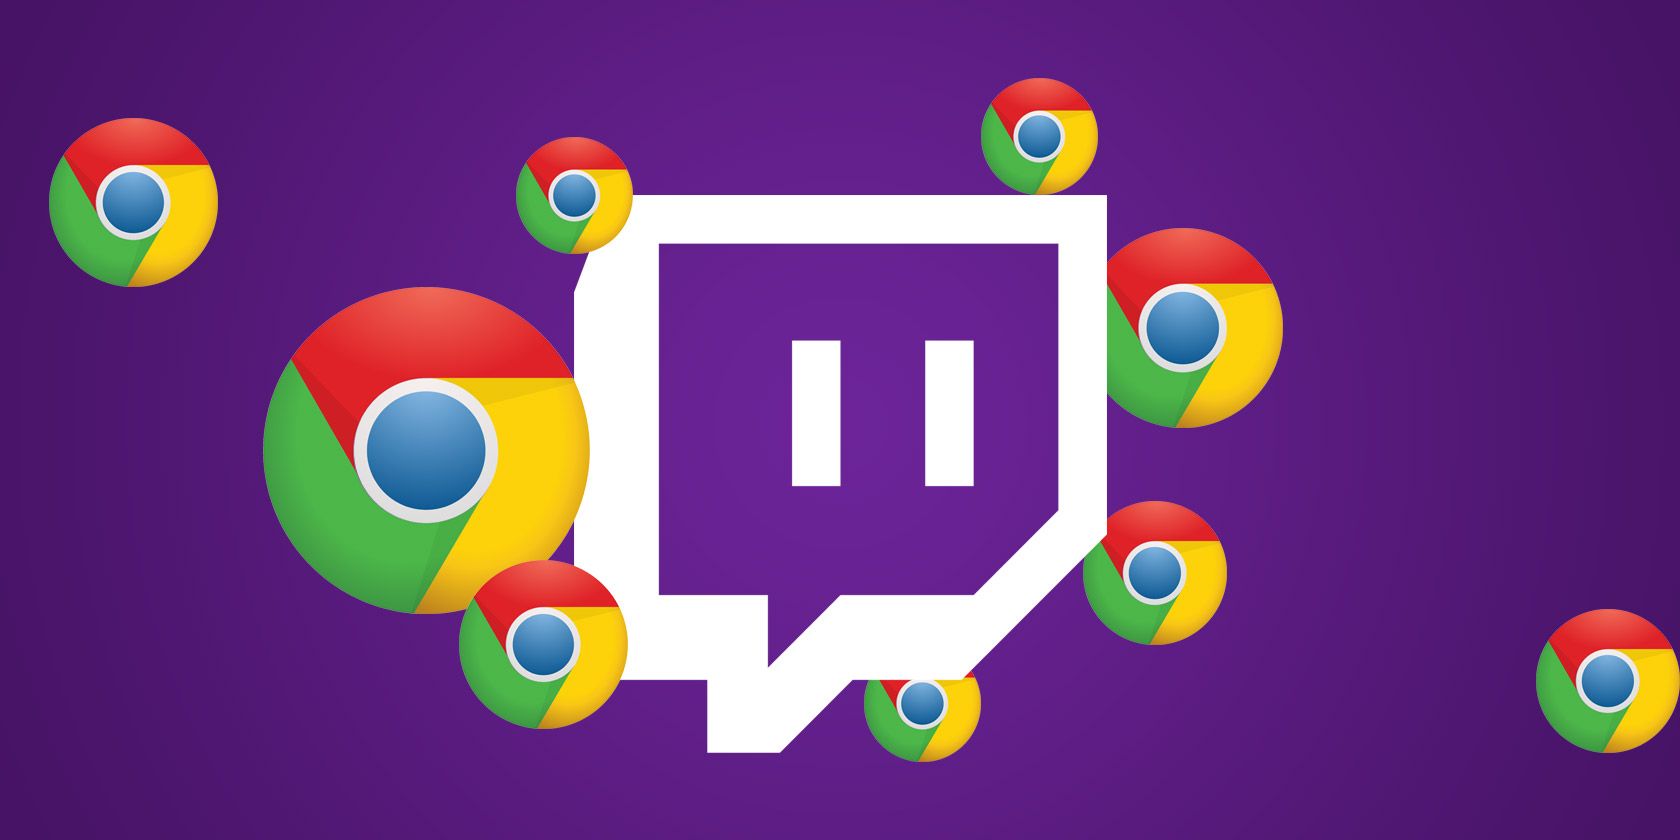 Twitch logo surrounded by Google Chrome logos